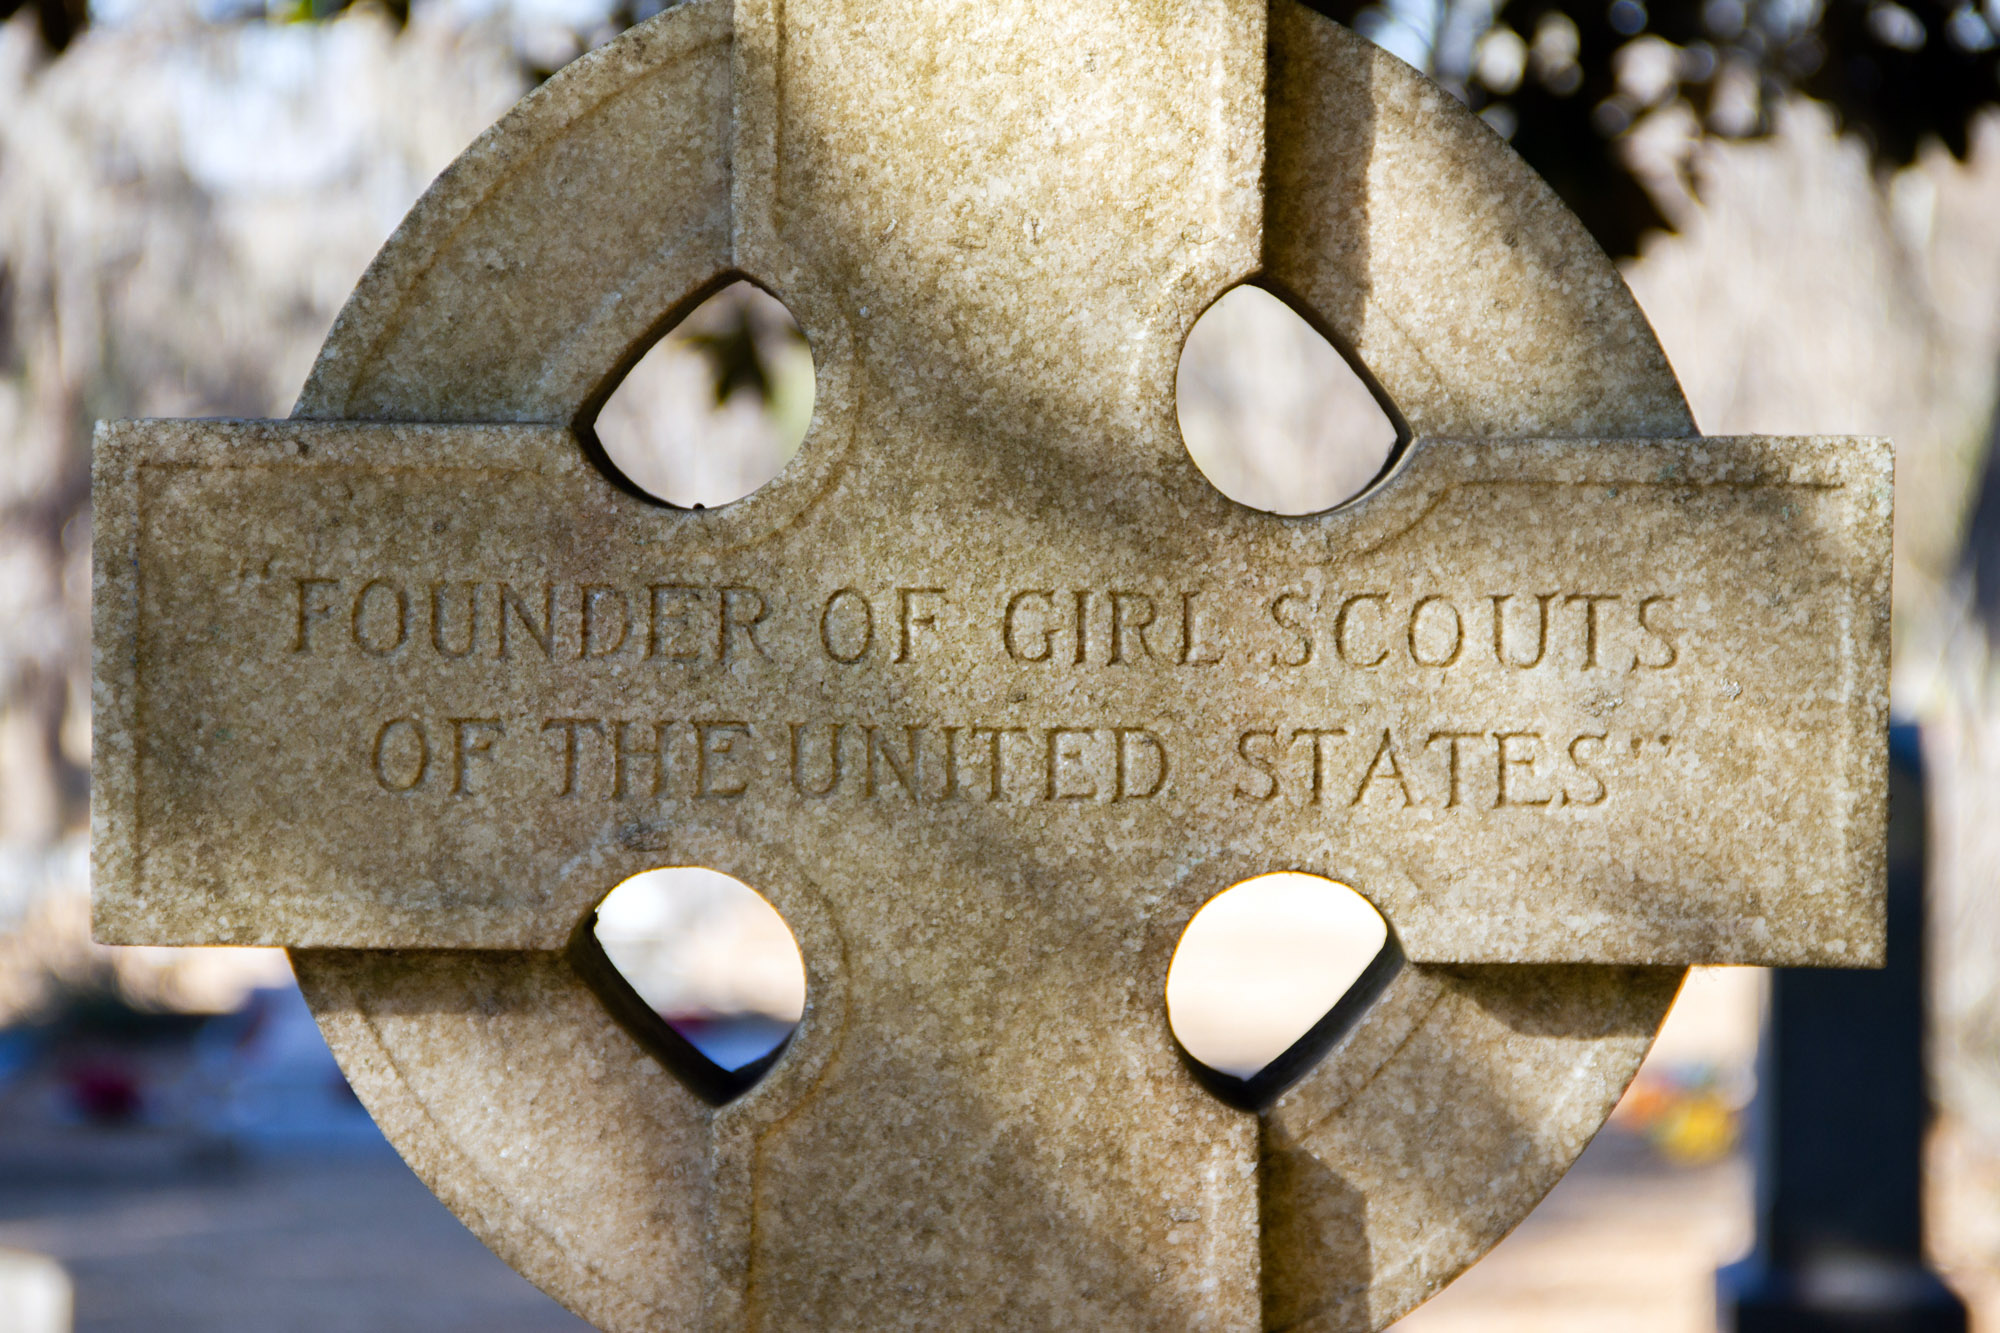 Girl Scout founder grave